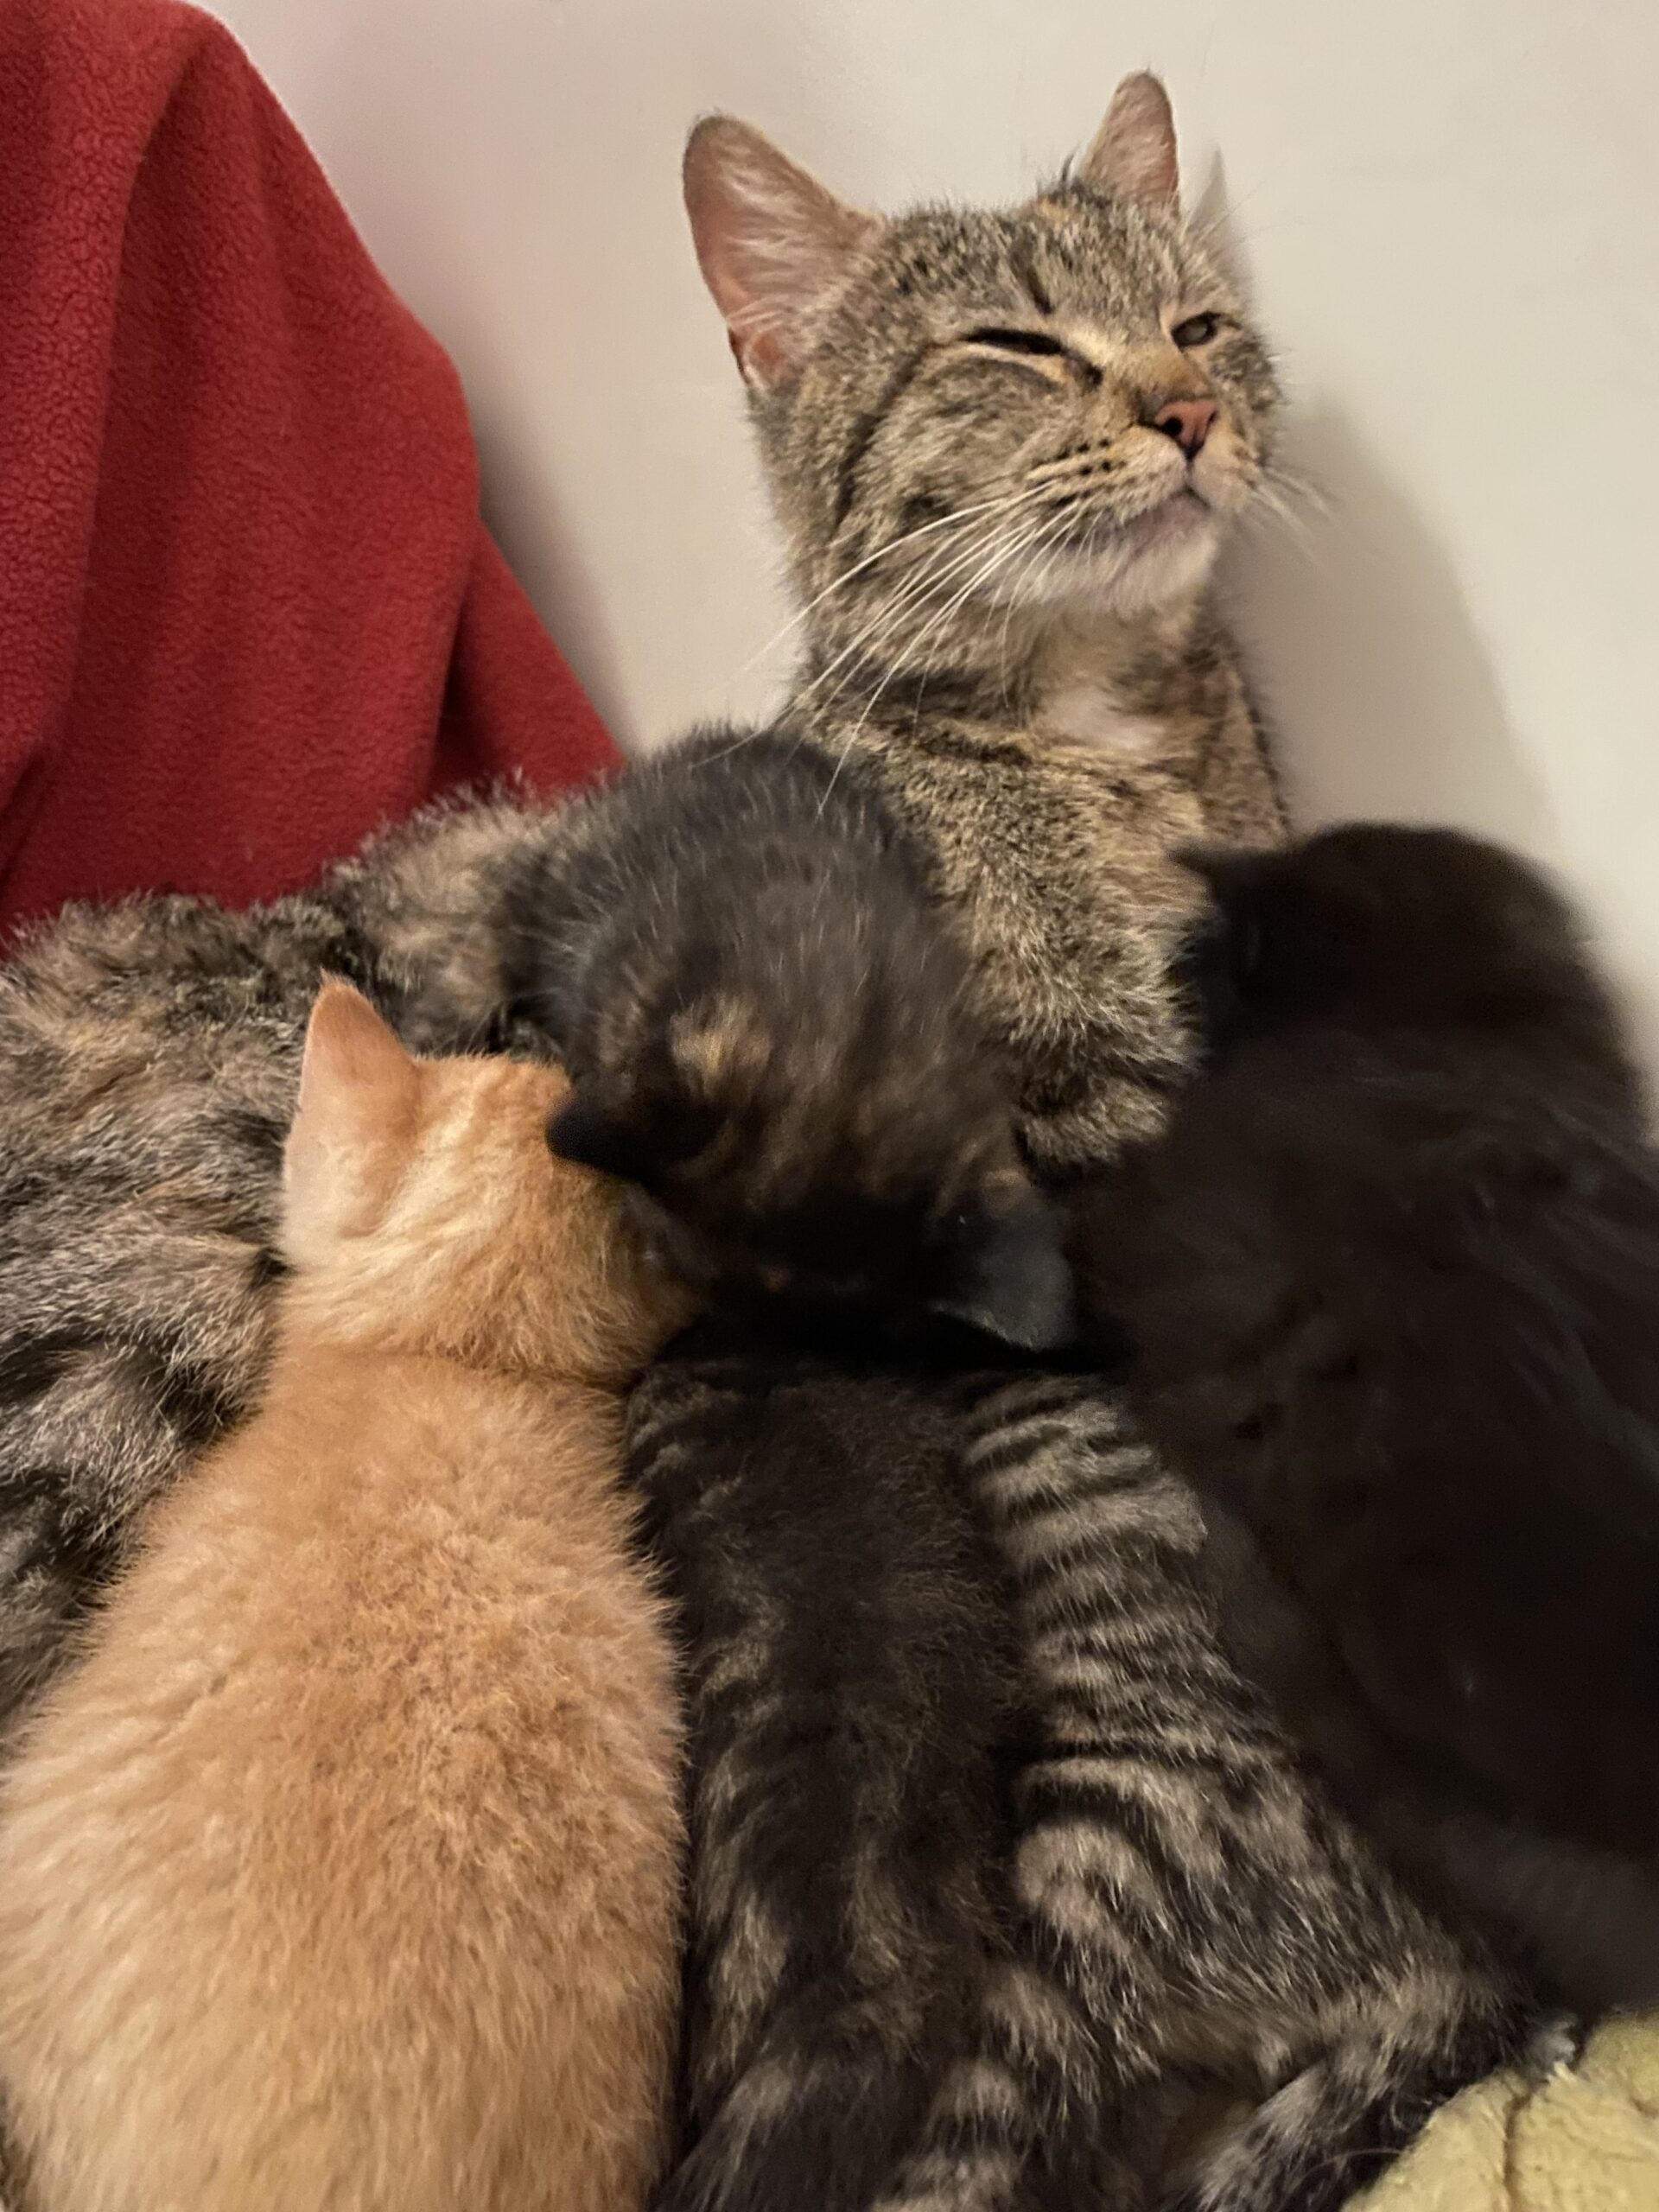 Zoey with her kittens